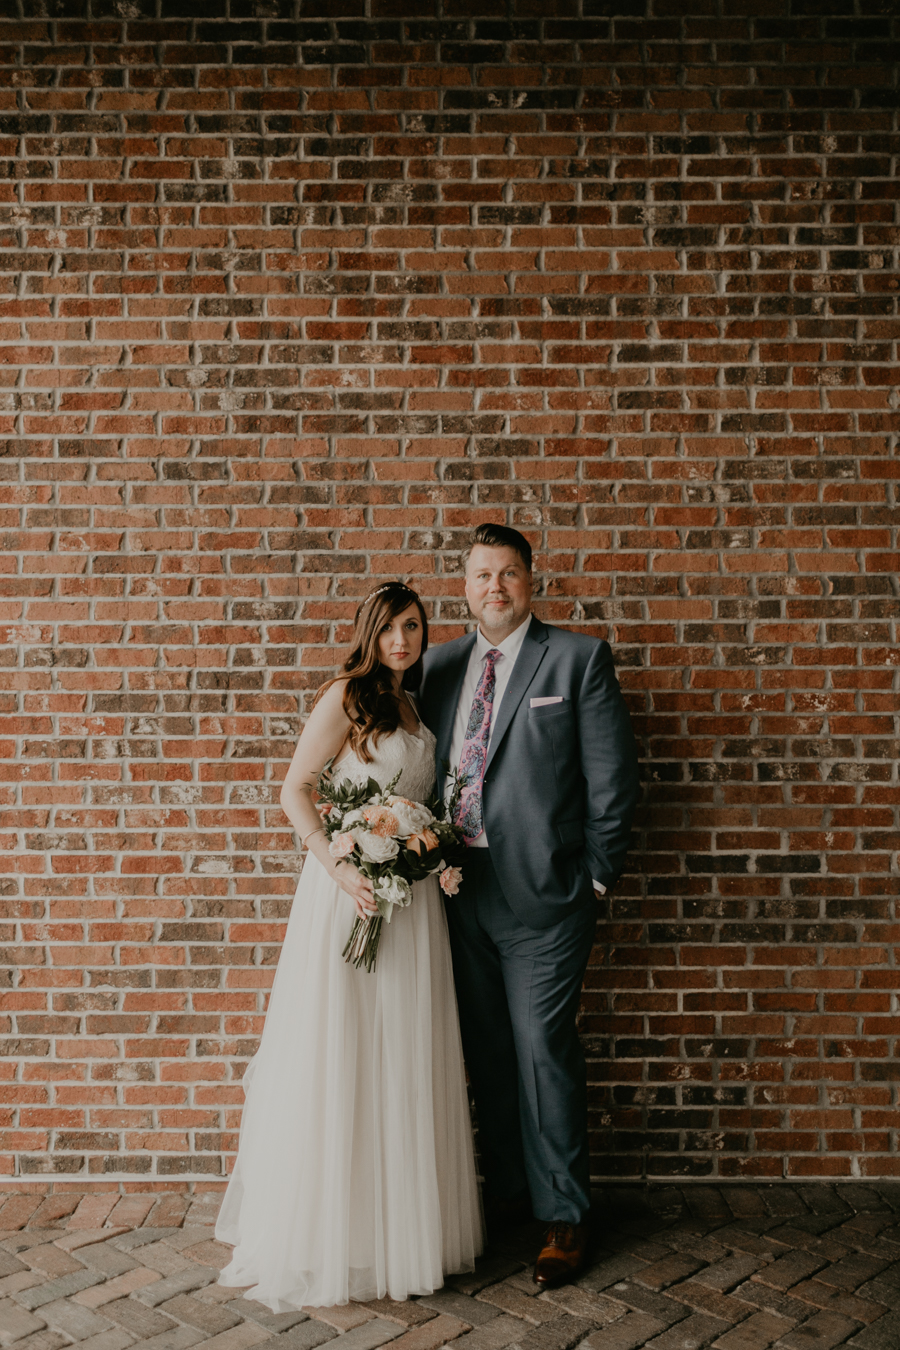 Stephanie And Kent Bailey Tampa Florida Romantic Wedding At Coppertail Brewery in Ybor Florist Fire BHLDN Mis En Place Ibex String Quartet Let Them Eat Cake -80.jpg